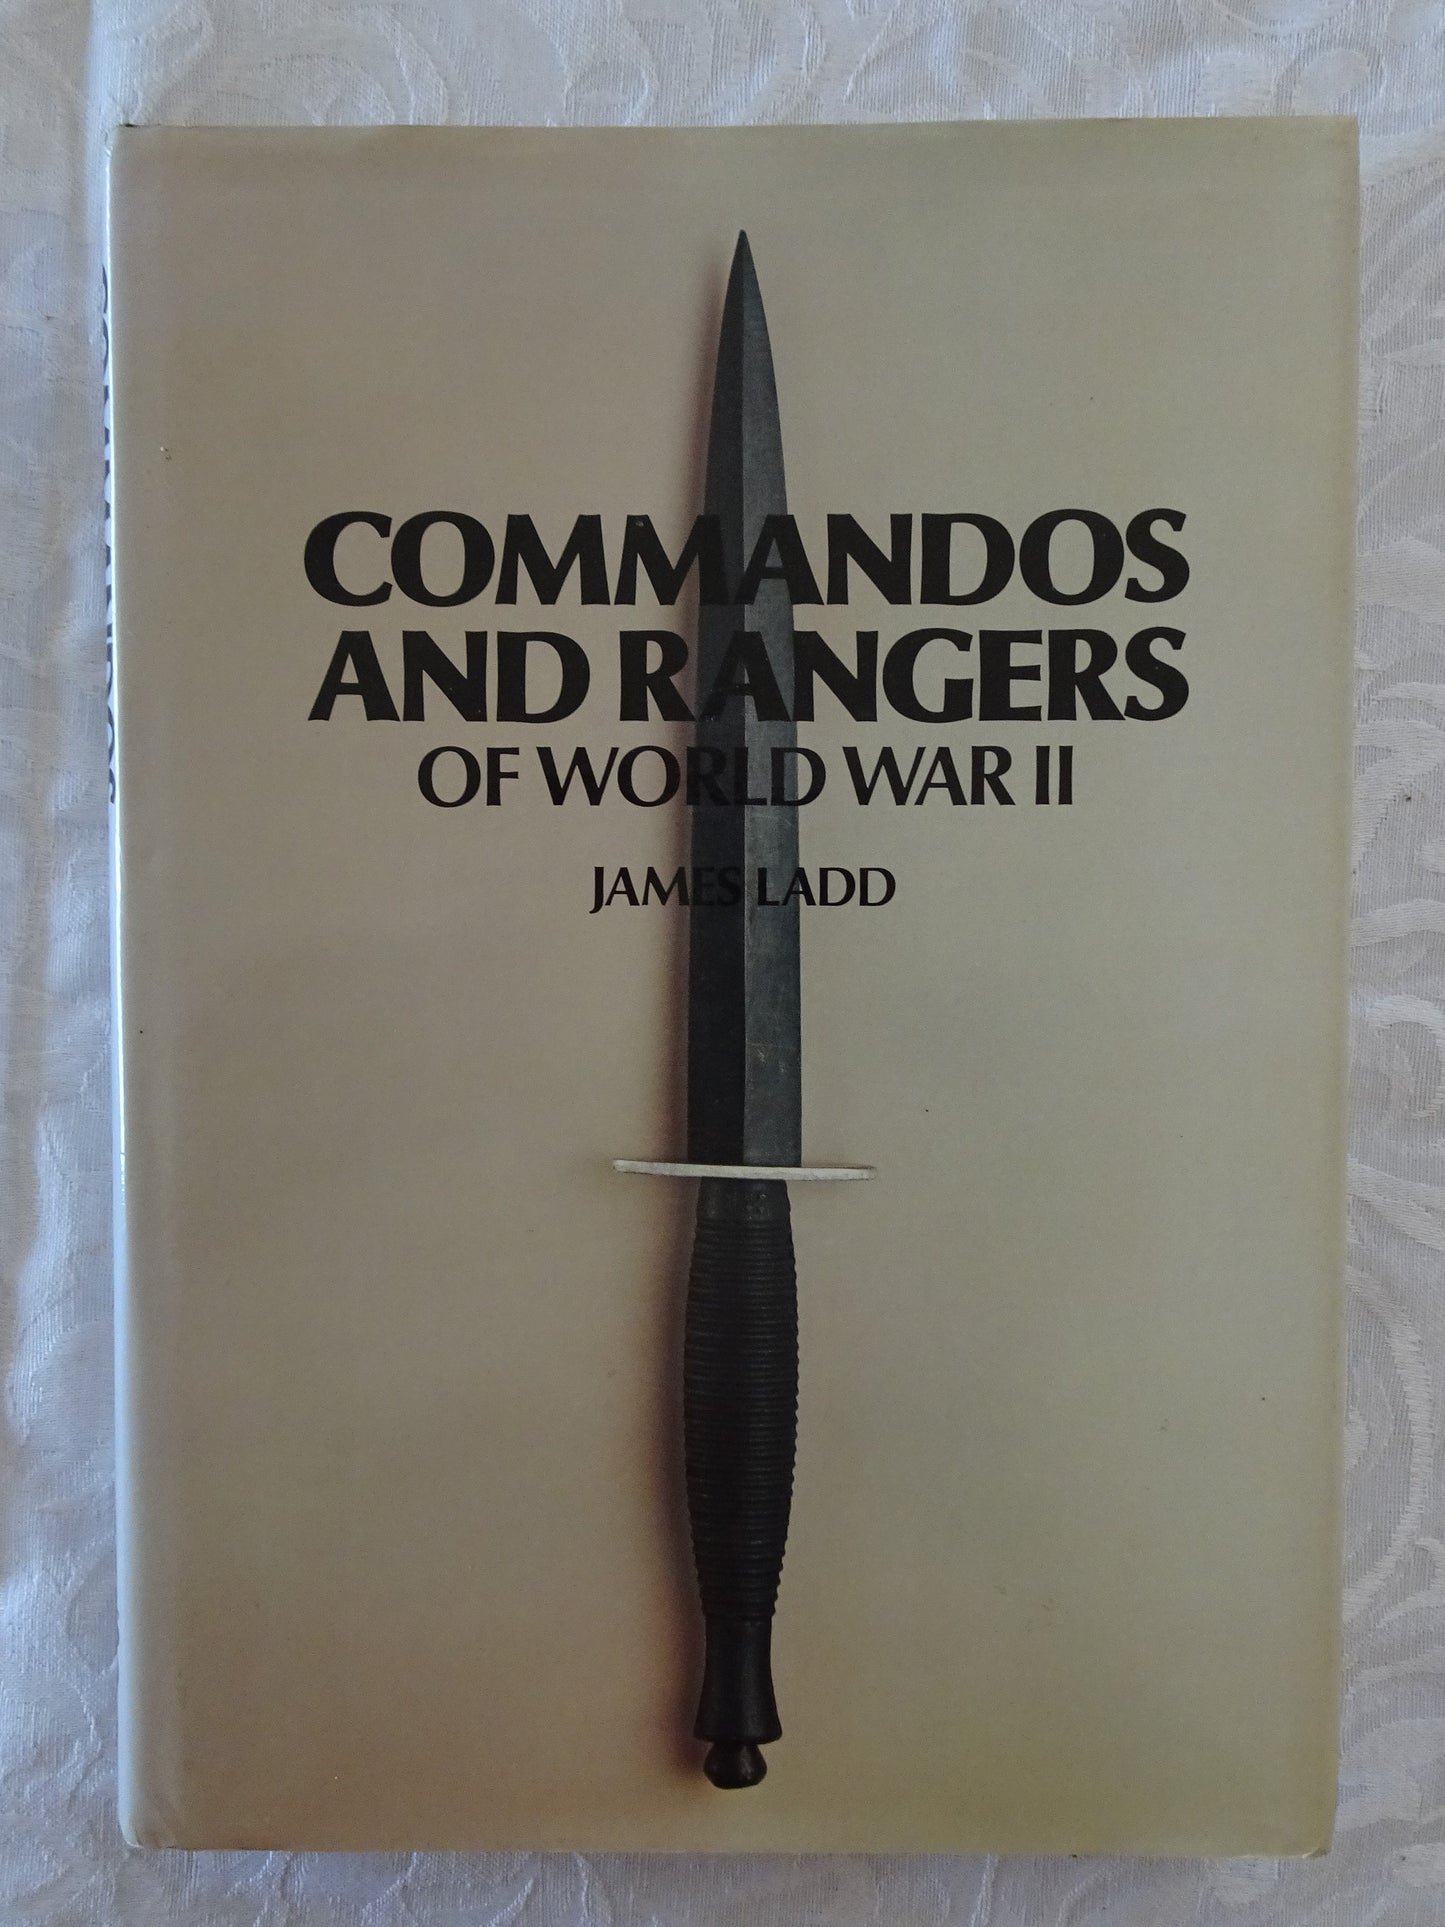 Commandos and Rangers of World War II by James Ladd